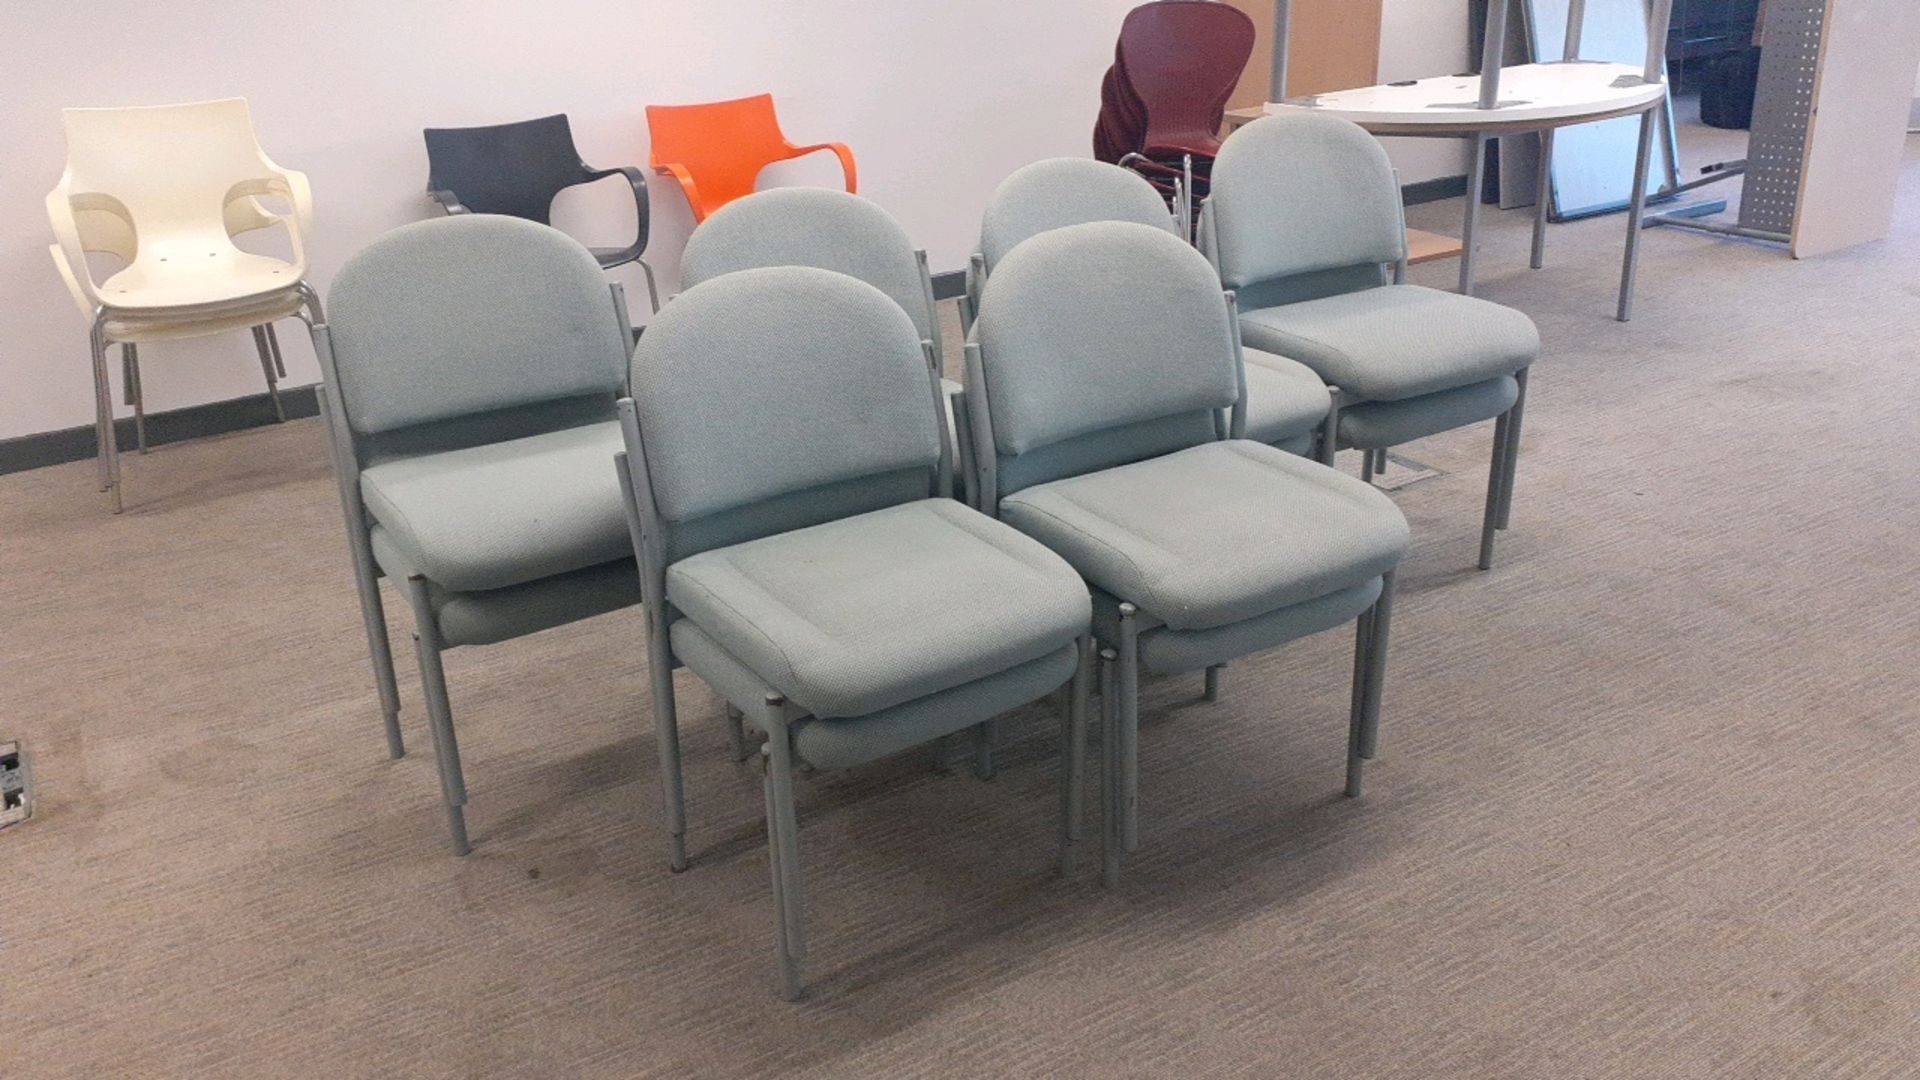 Meeting chairs - Image 2 of 2